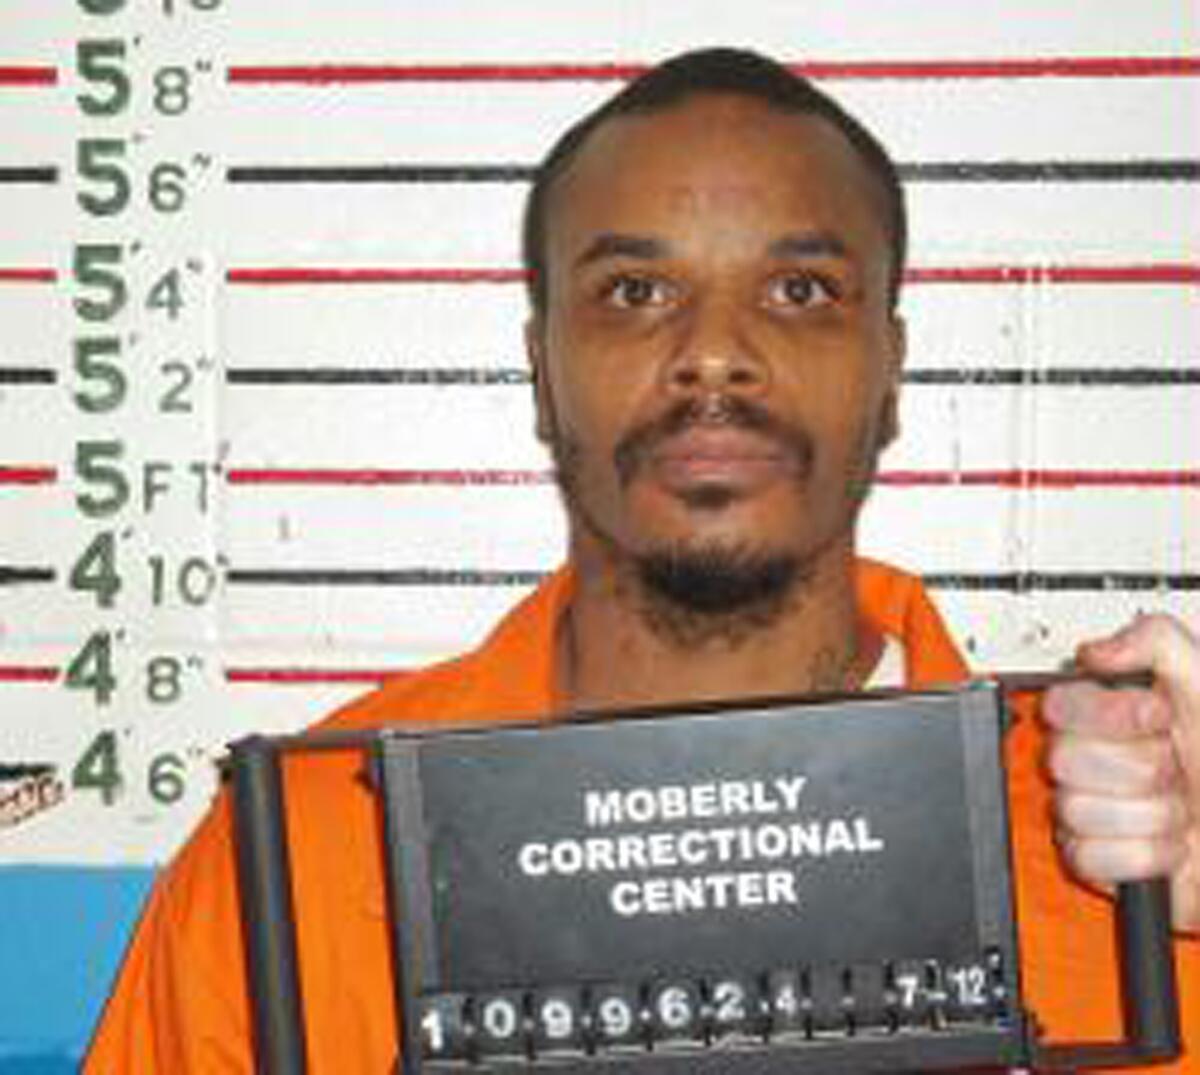 Undated booking photo released of Carlin Q. Williams. (Missouri Department of Corrections via Associated Press)